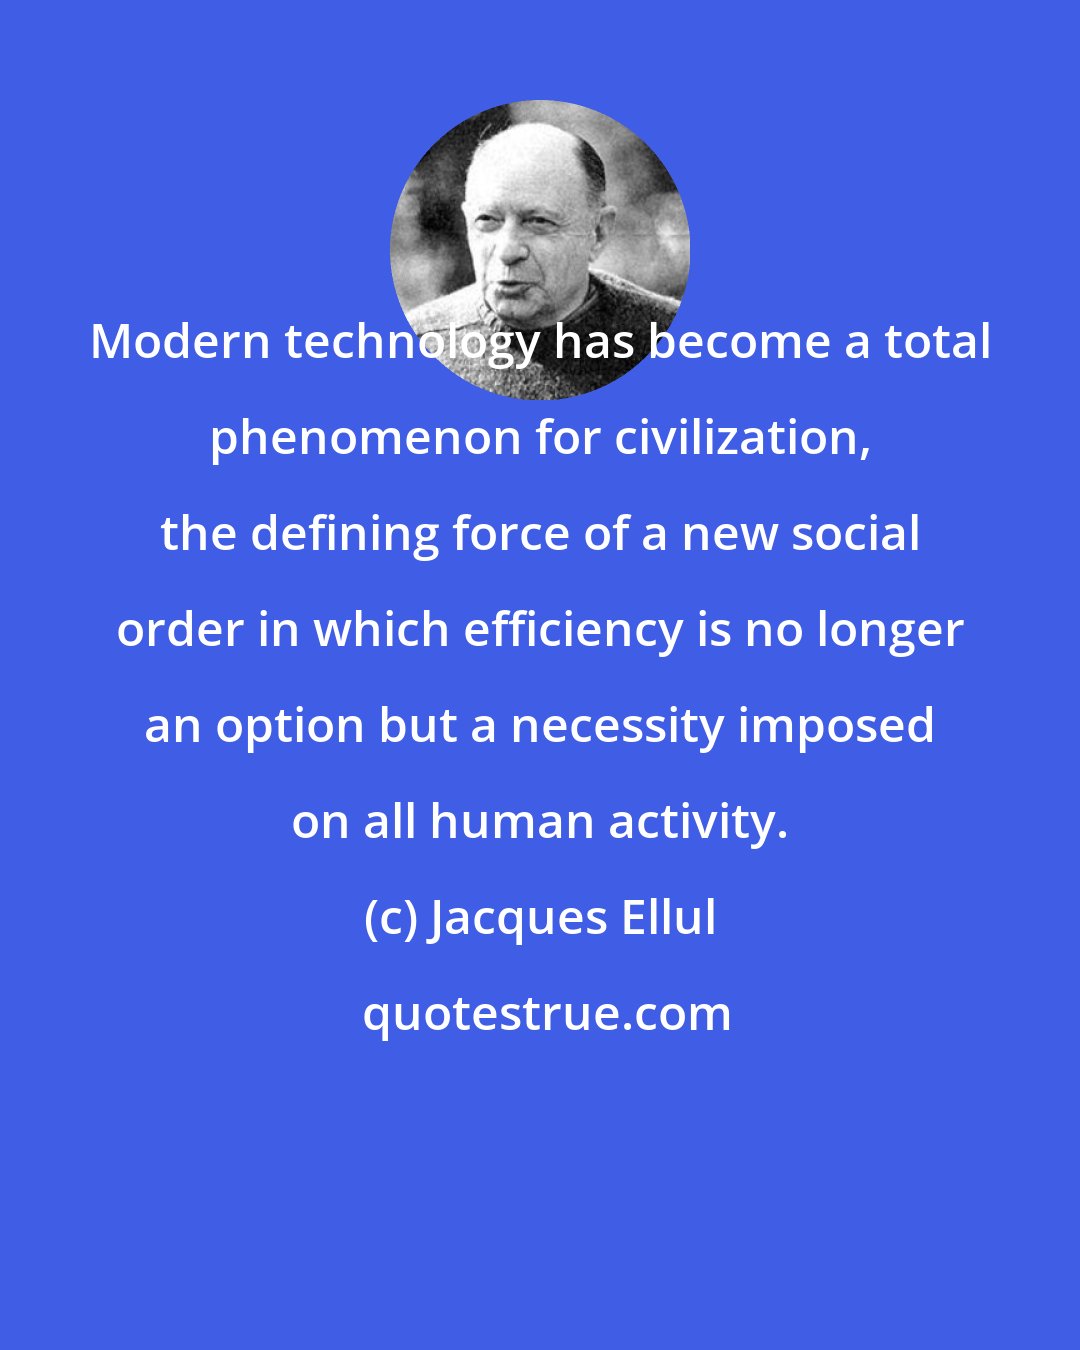 Jacques Ellul: Modern technology has become a total phenomenon for civilization, the defining force of a new social order in which efficiency is no longer an option but a necessity imposed on all human activity.